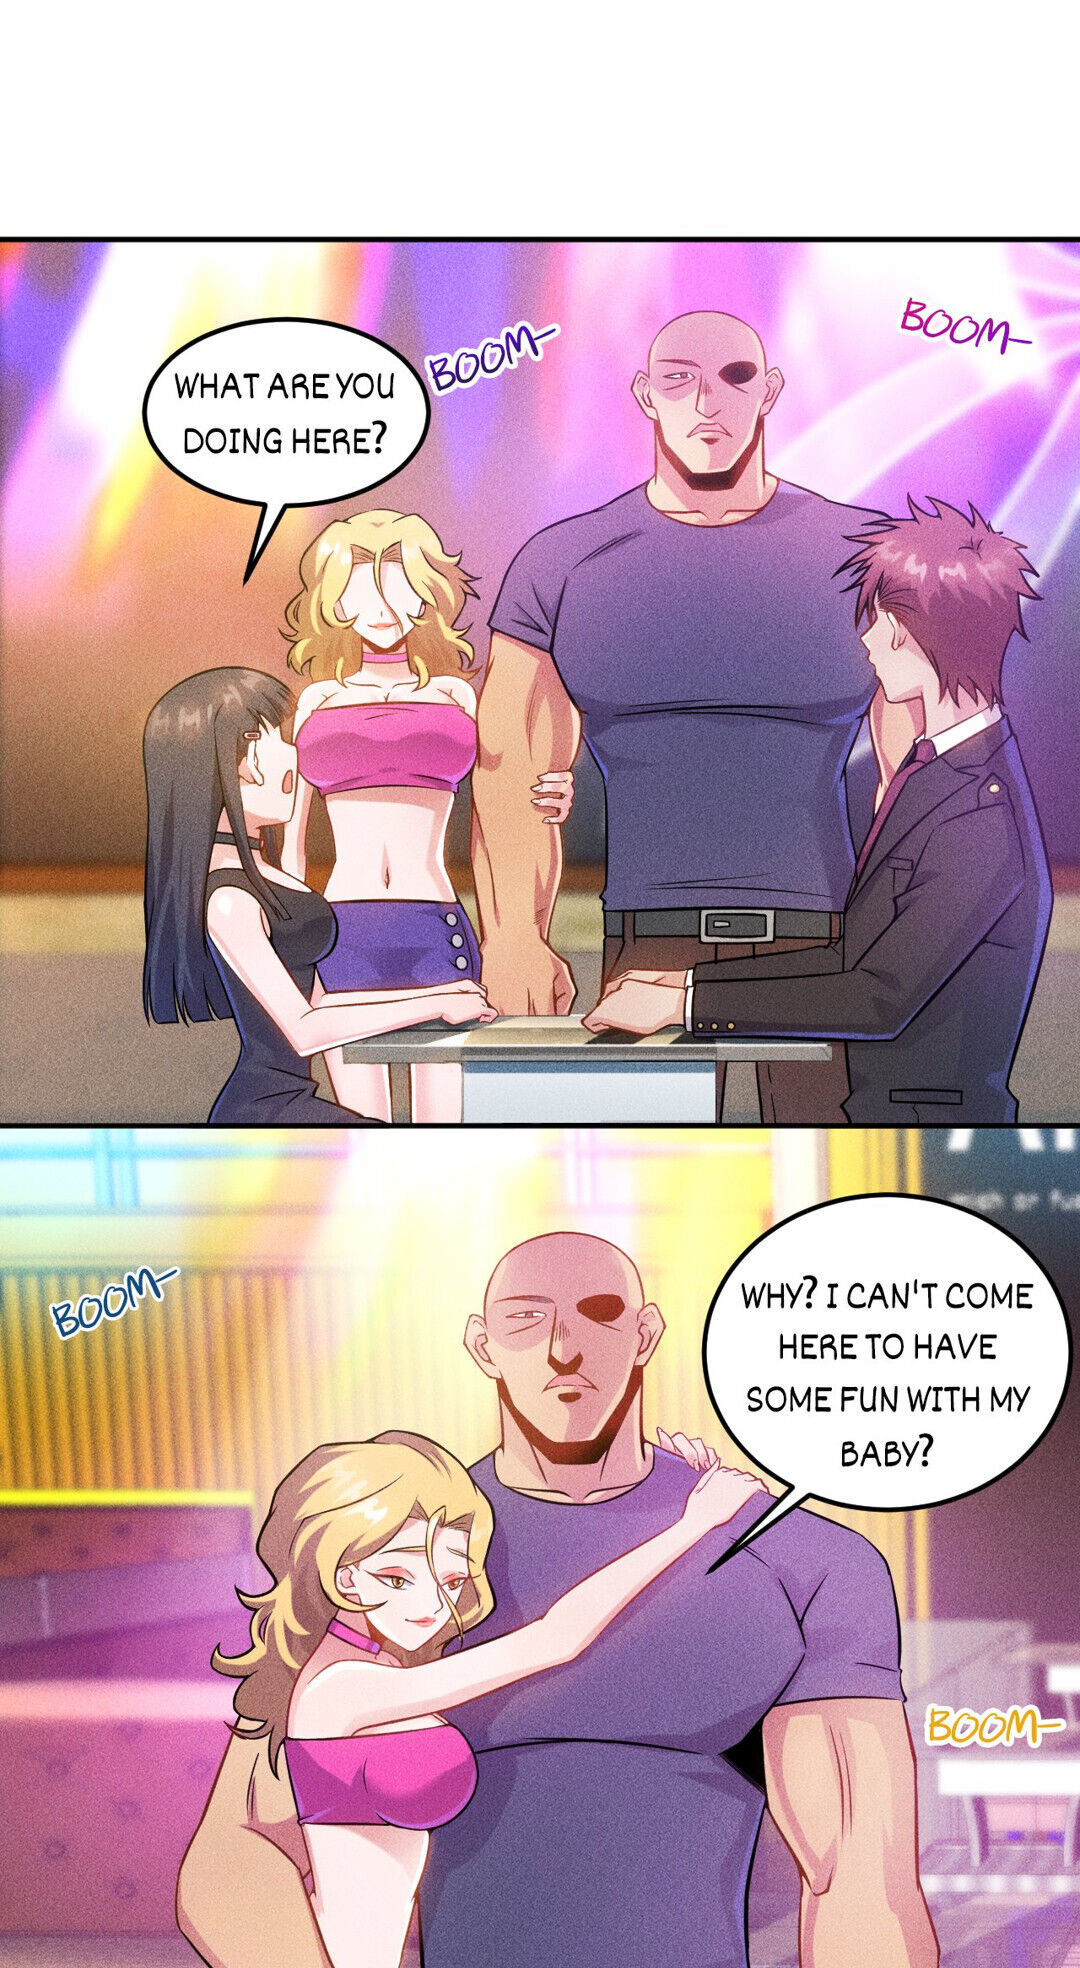 Her Private Bodyguard - Page 1